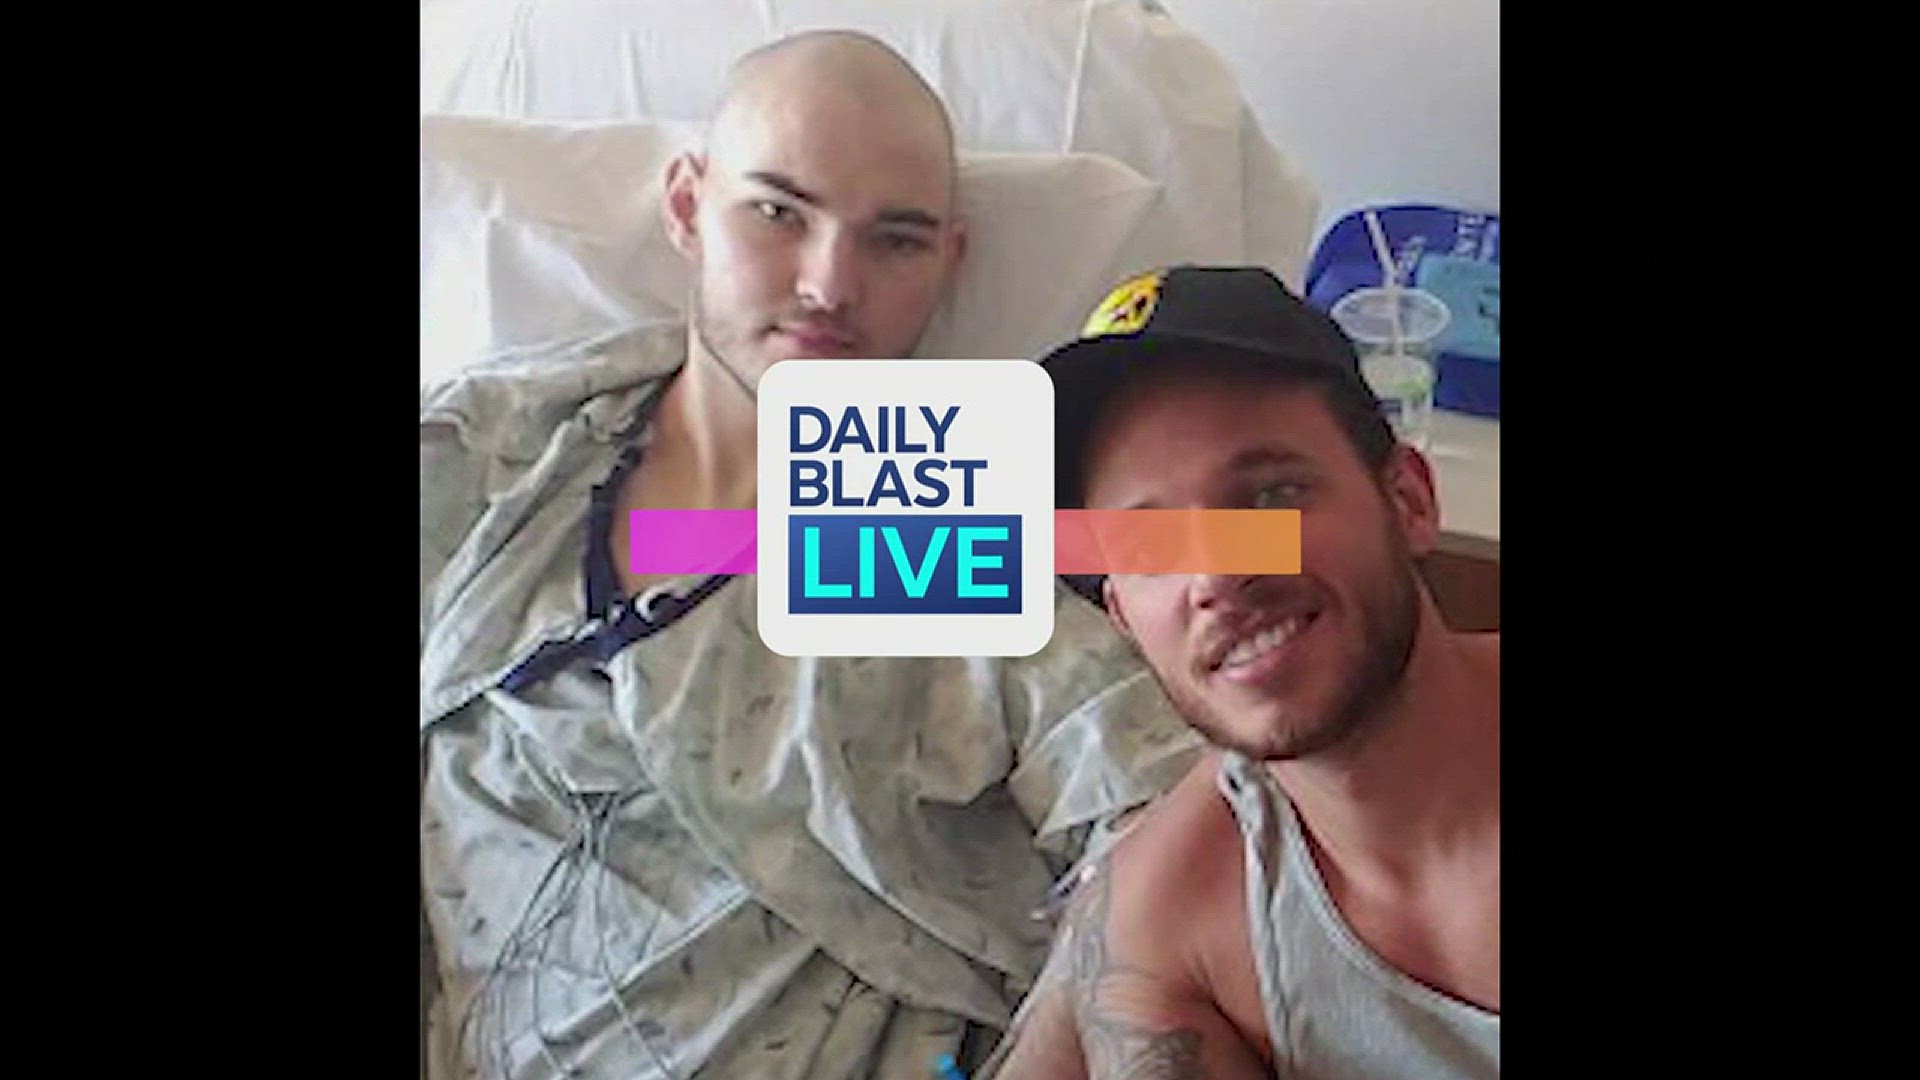 Daily Blast LIVE's The Comeback reveals how a single a kidney united two strangers